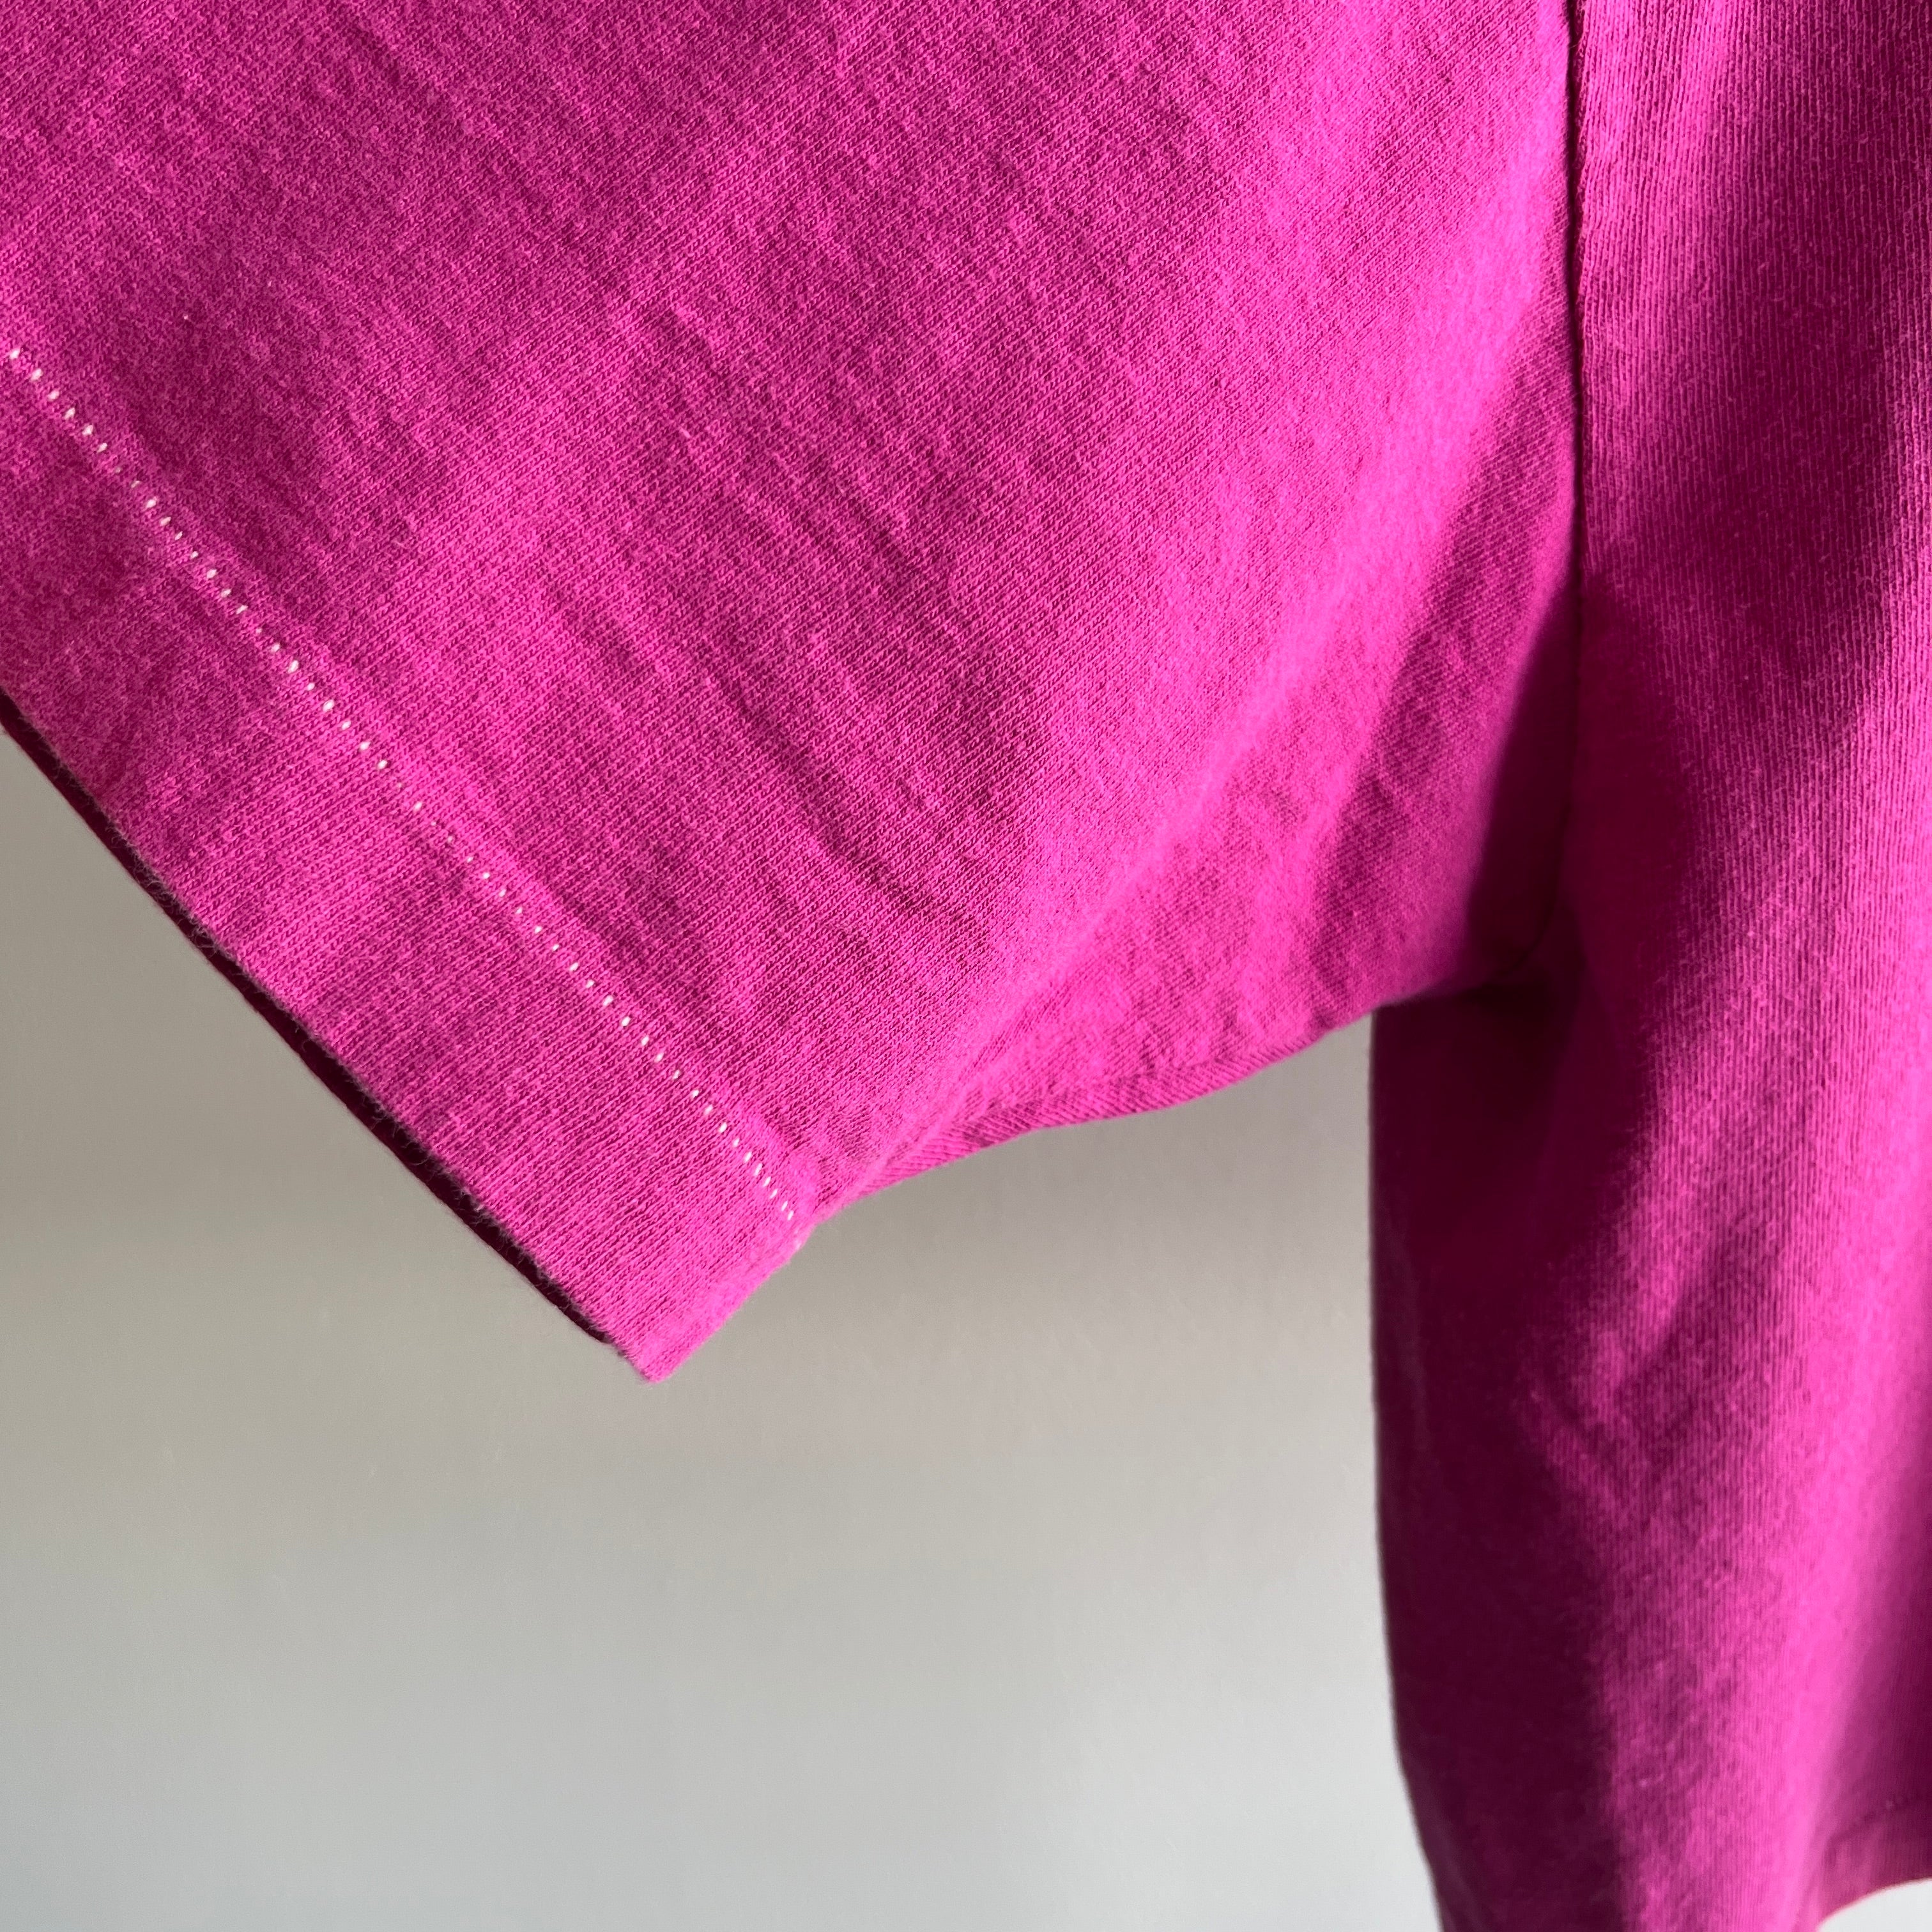 1980s Hot Pink Cotton Crop Top T-Shirt with White Contrast Stitching - Swoon